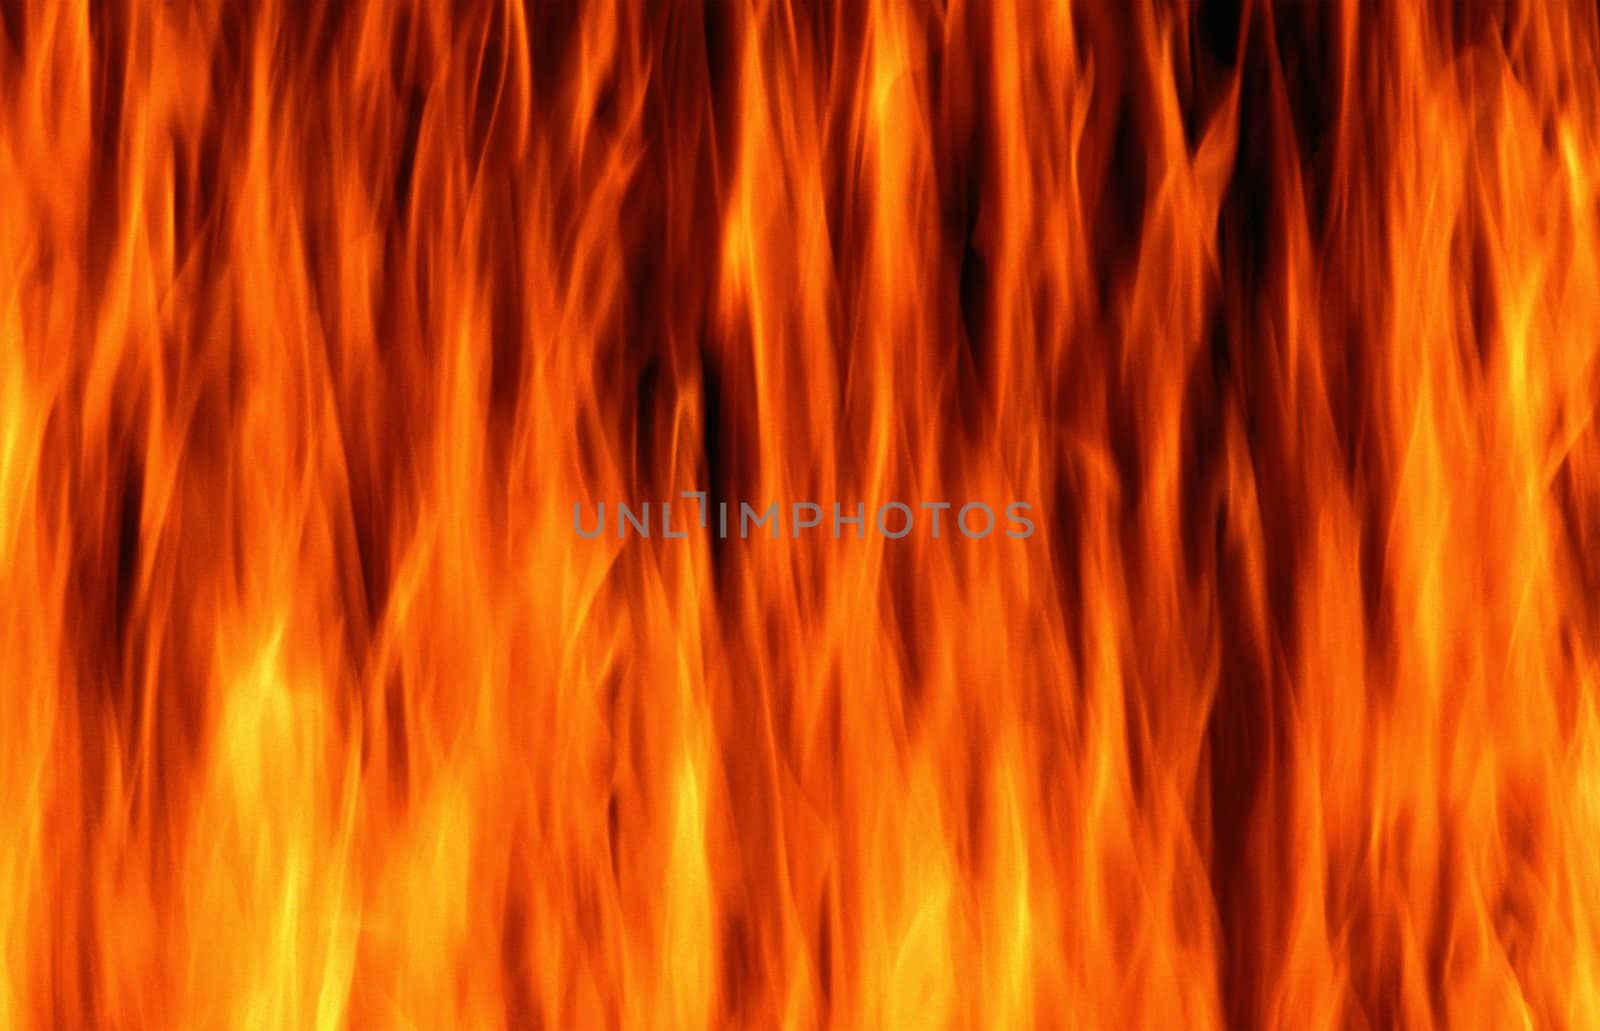 Close-up of fire and flames on a black background